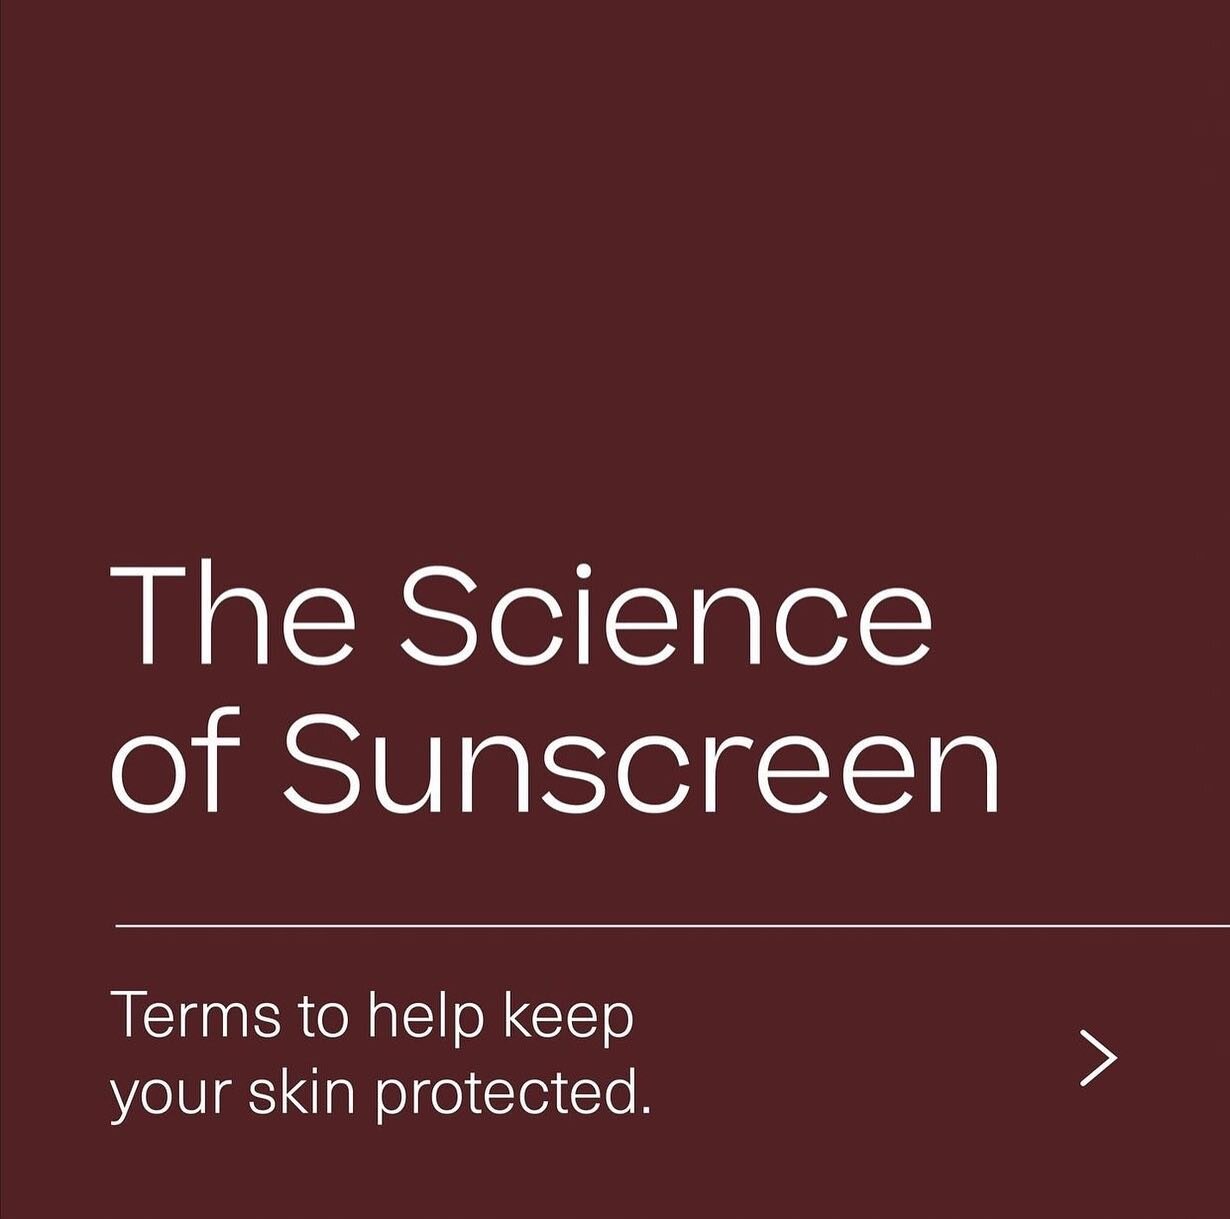 Ever wonder what some of these
sunscreen terms mean?

&mdash;

Learn how to protect your skin from head to toe at www.UrbanAllureSF.com. 

&mdash;
#sunprotection #spf #skincare #skincareproducts #antiaging #beautytips #skincaretip #skincaretips